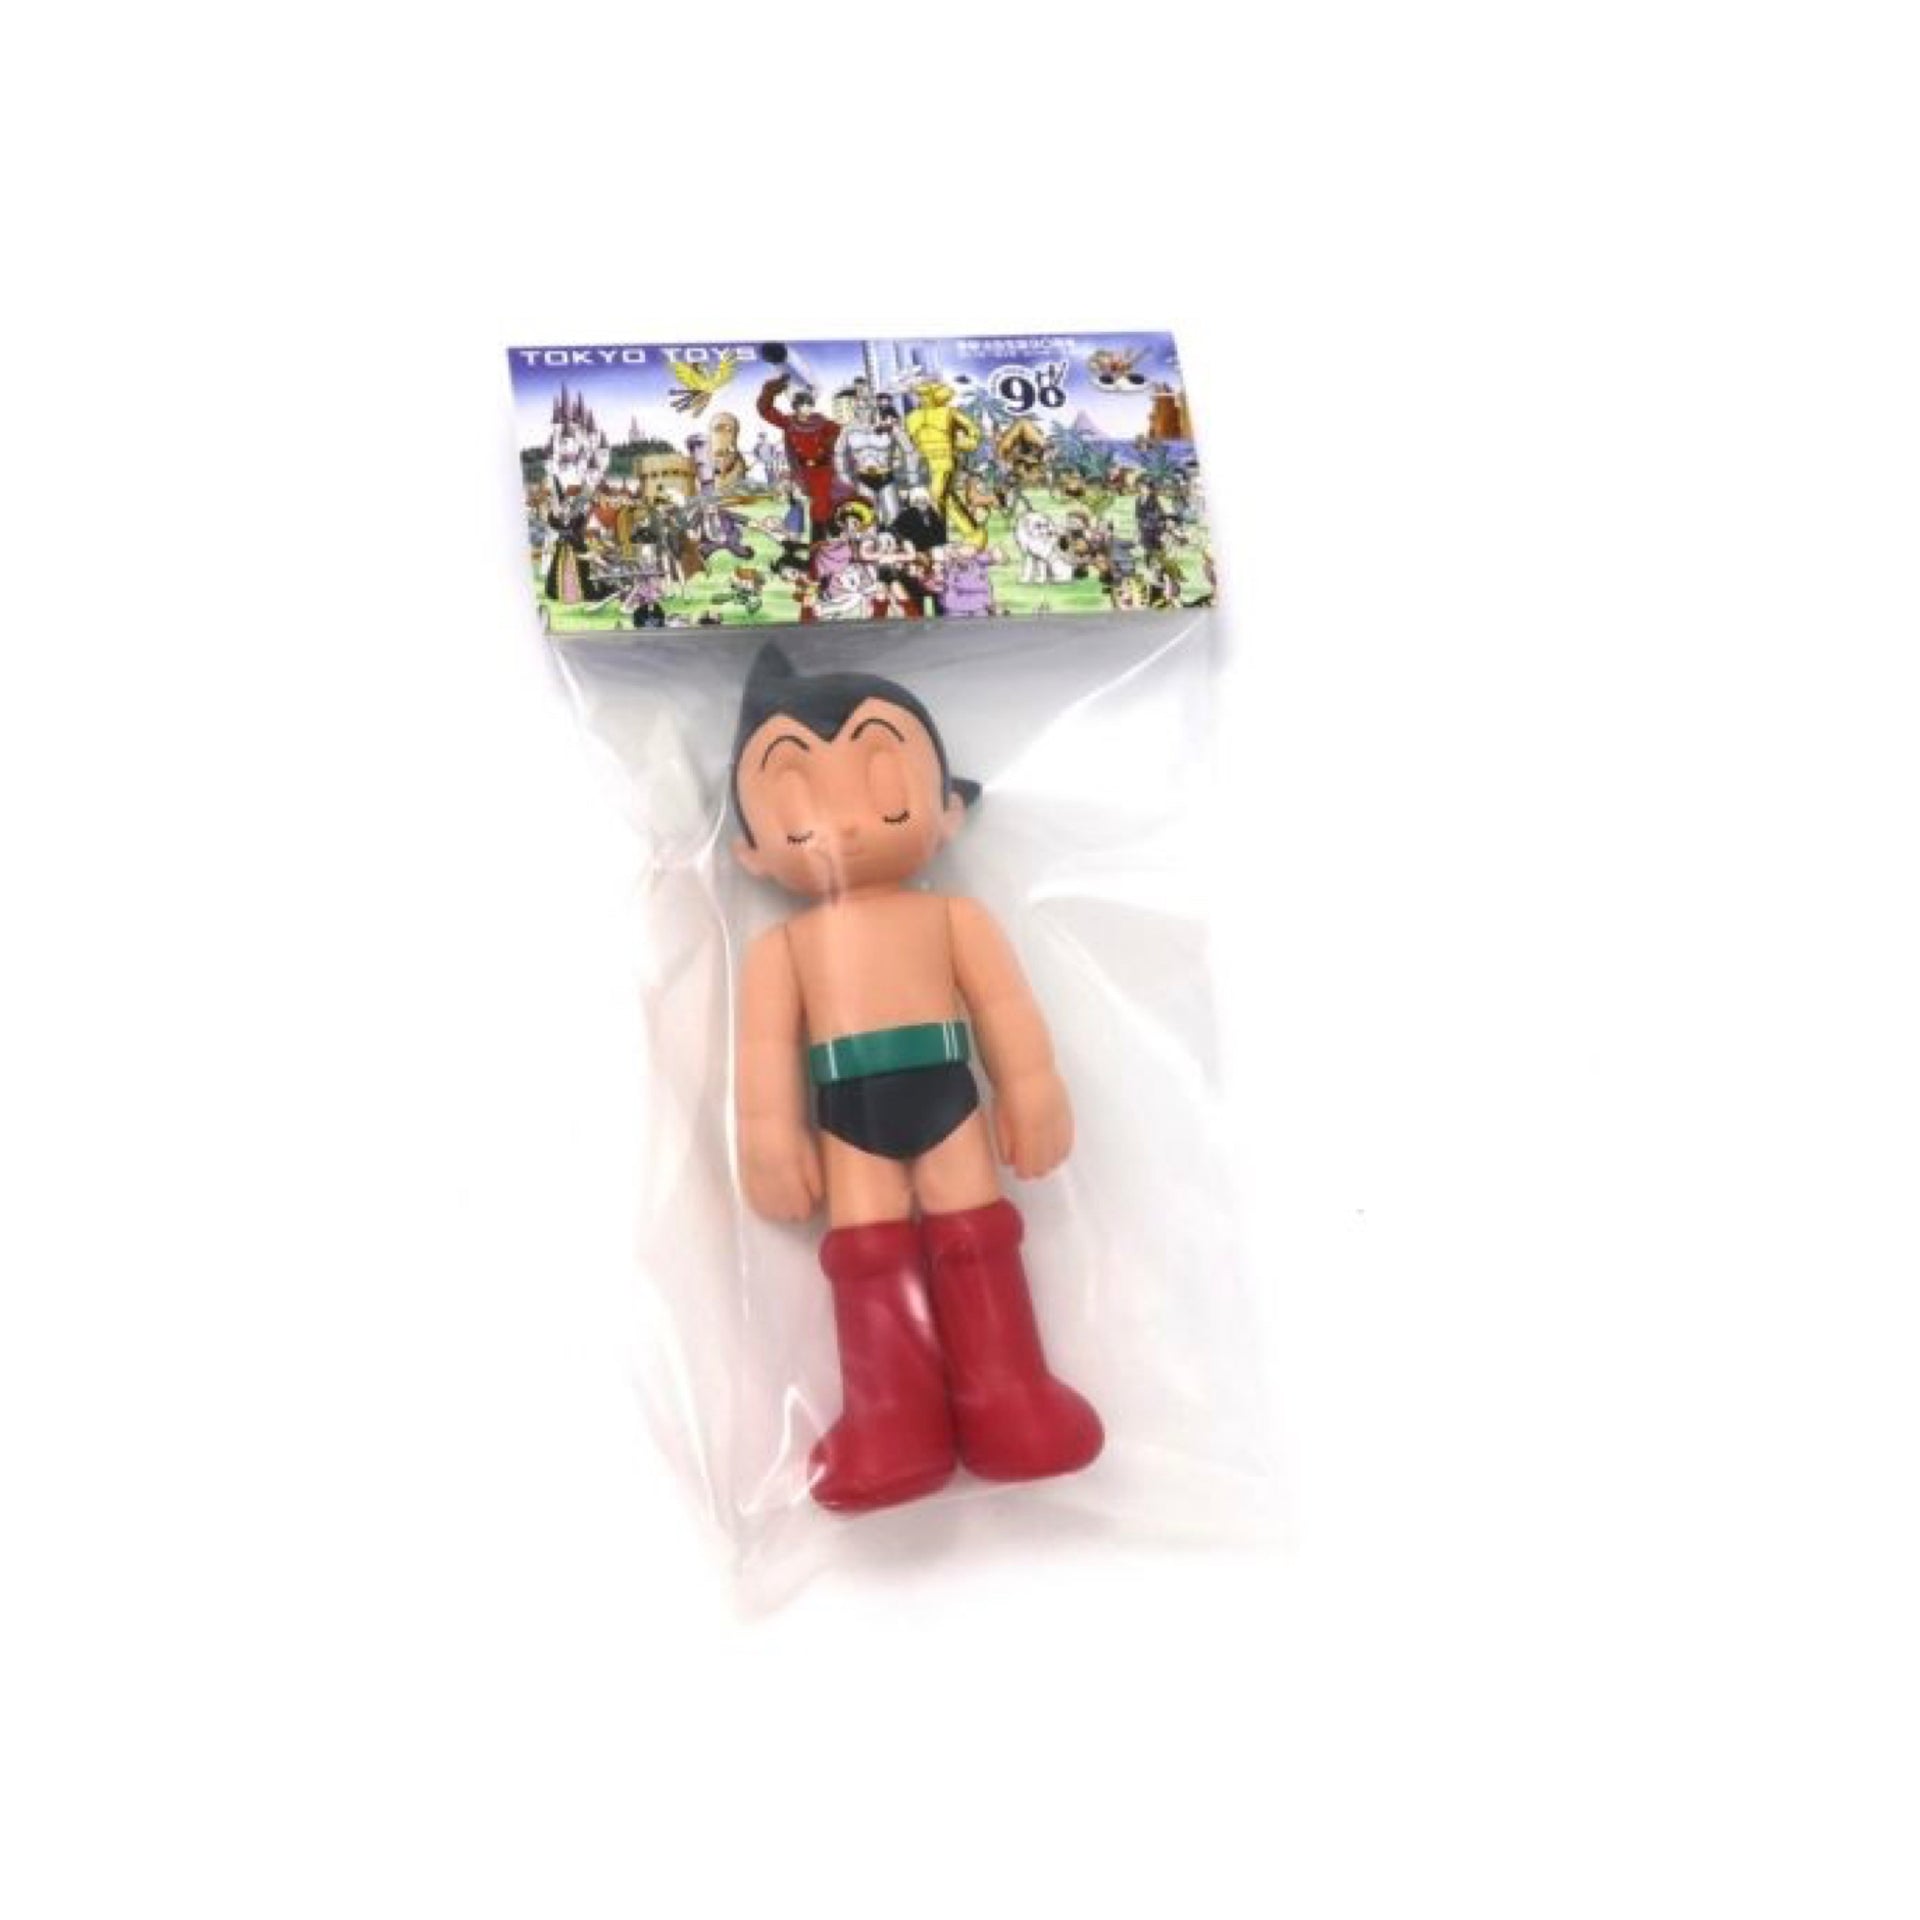 Astro Boy PVC (Closed Eyes - Colored) by Tezuka Productions